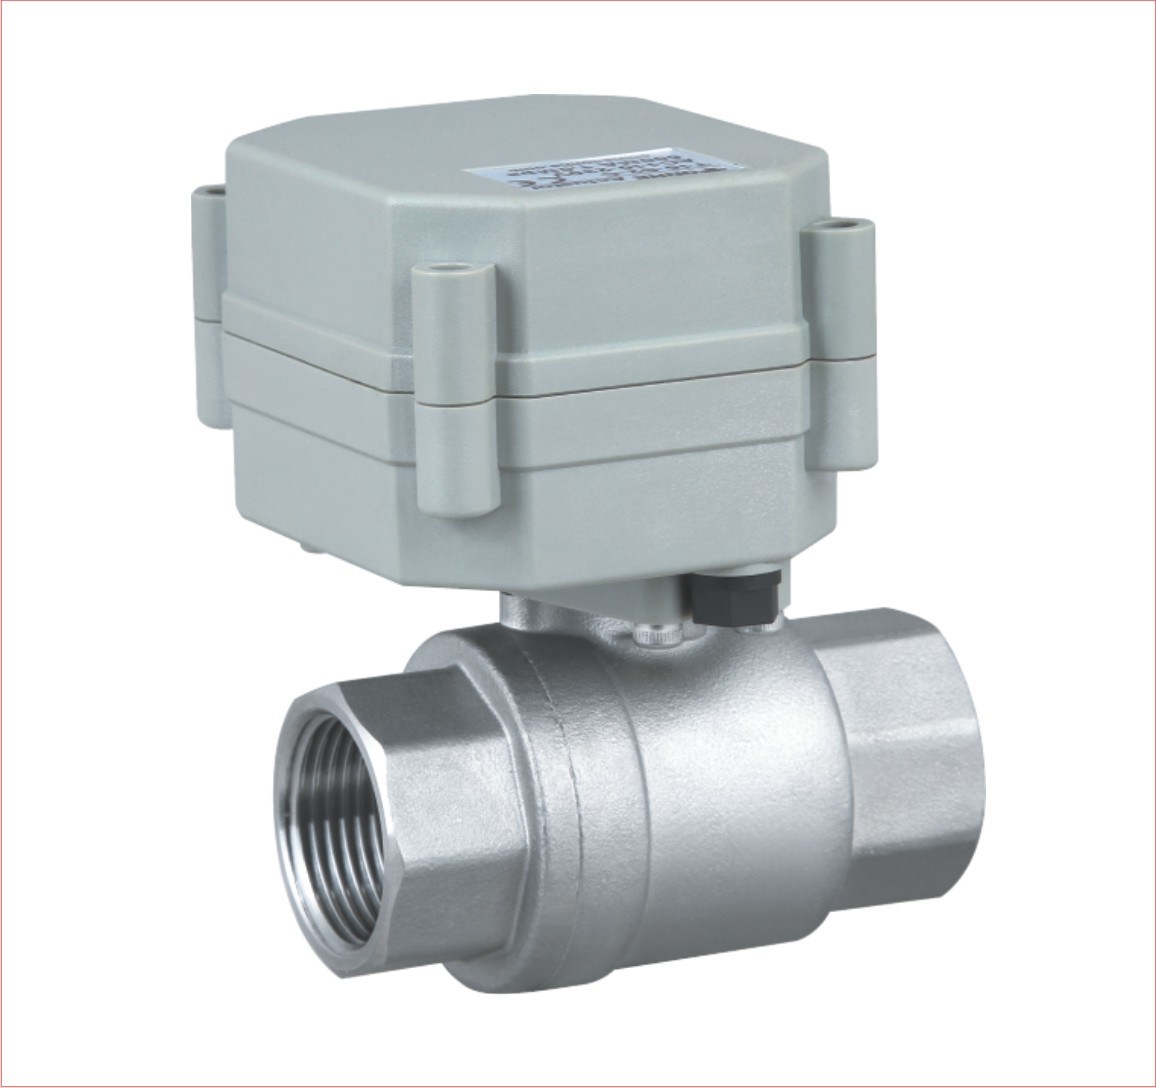 Motorized Valve for Water Control (T25-S2-A)